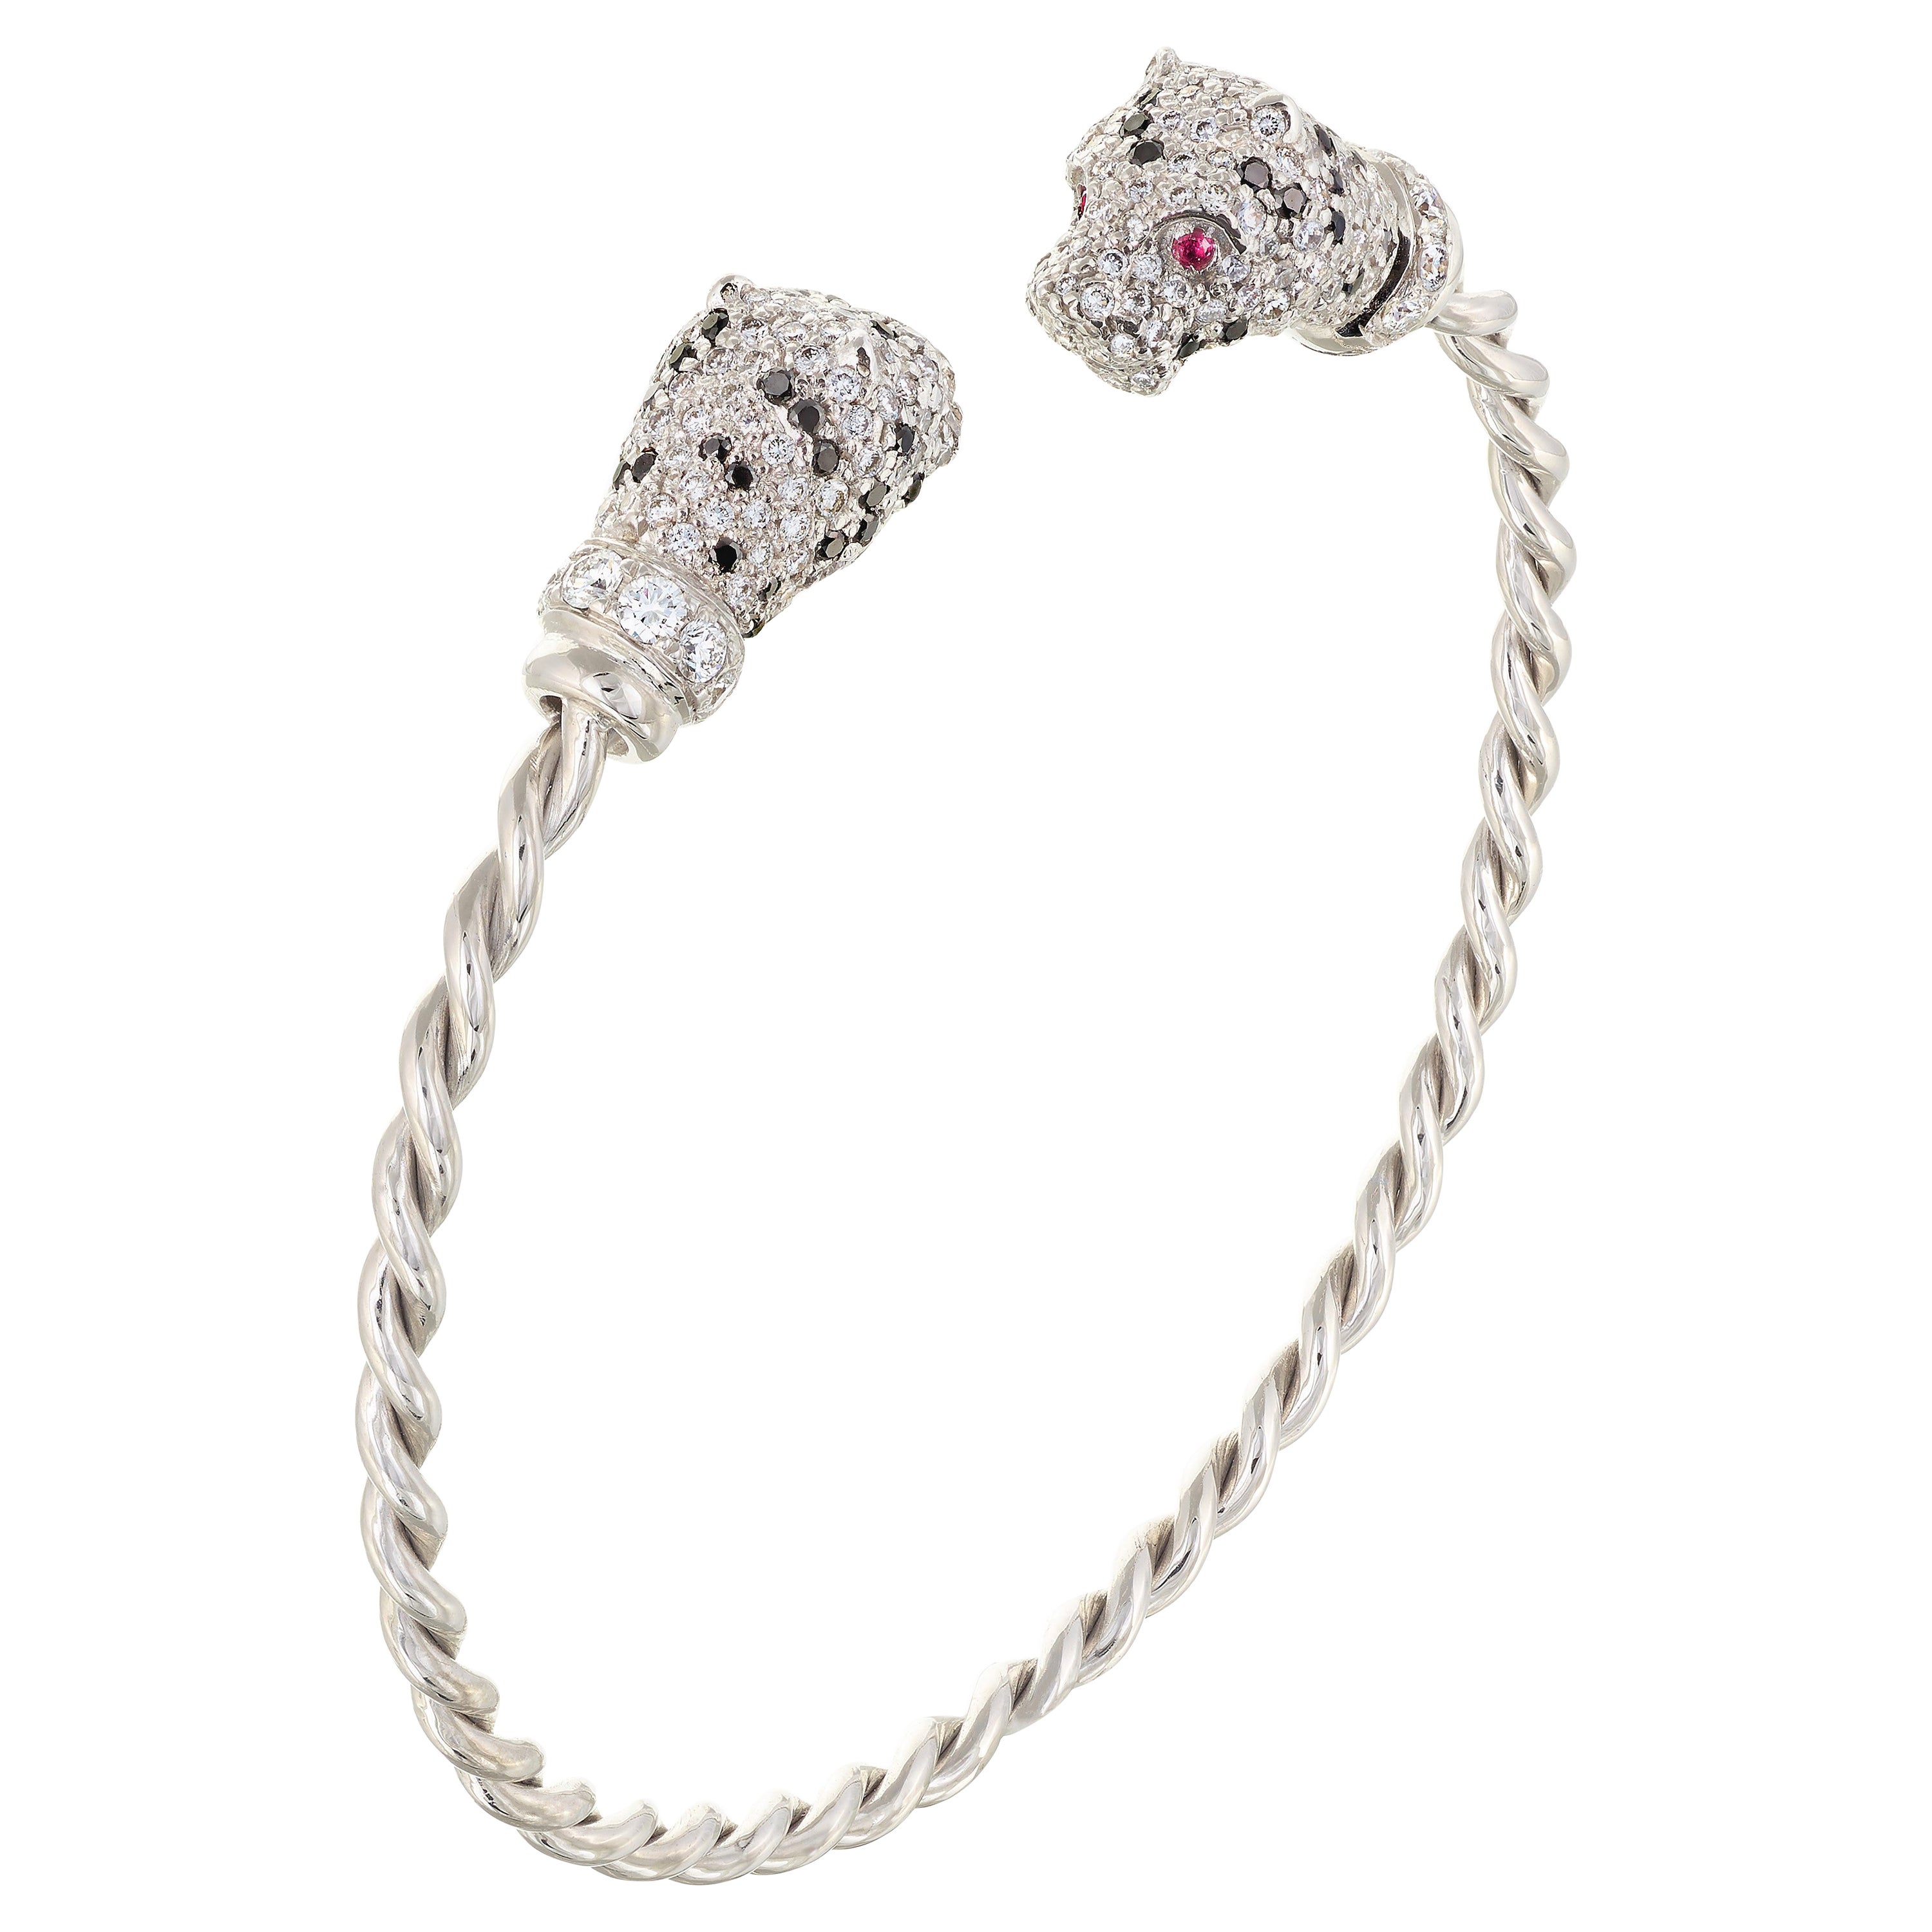 Rosior One-off Diamond and Ruby "Tiger" Cuff Bracelet set in White Gold